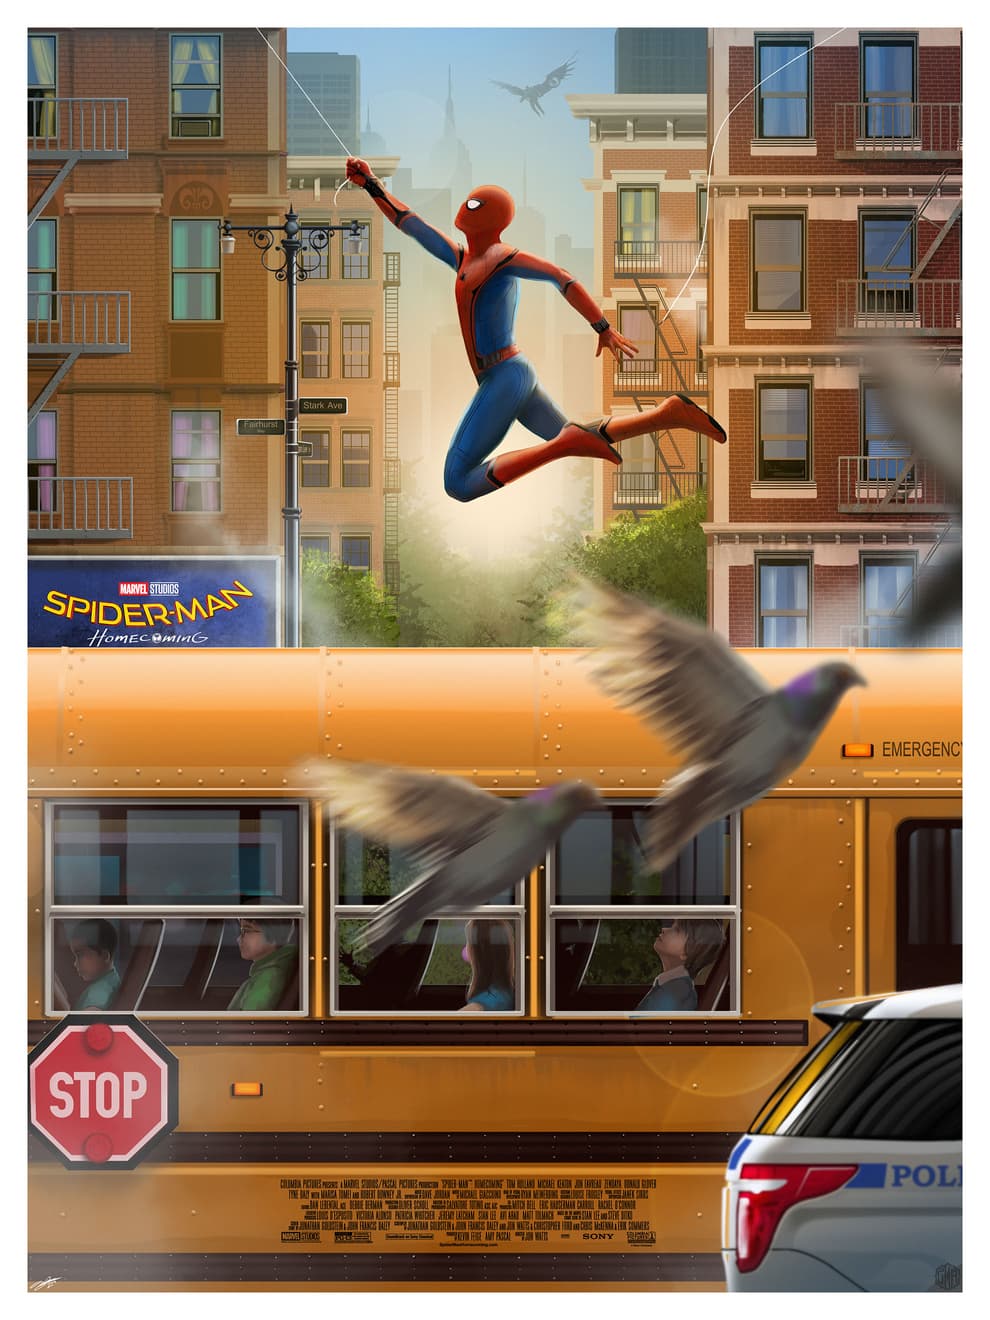 Spider-Man Homecoming by Andy Fairhurst